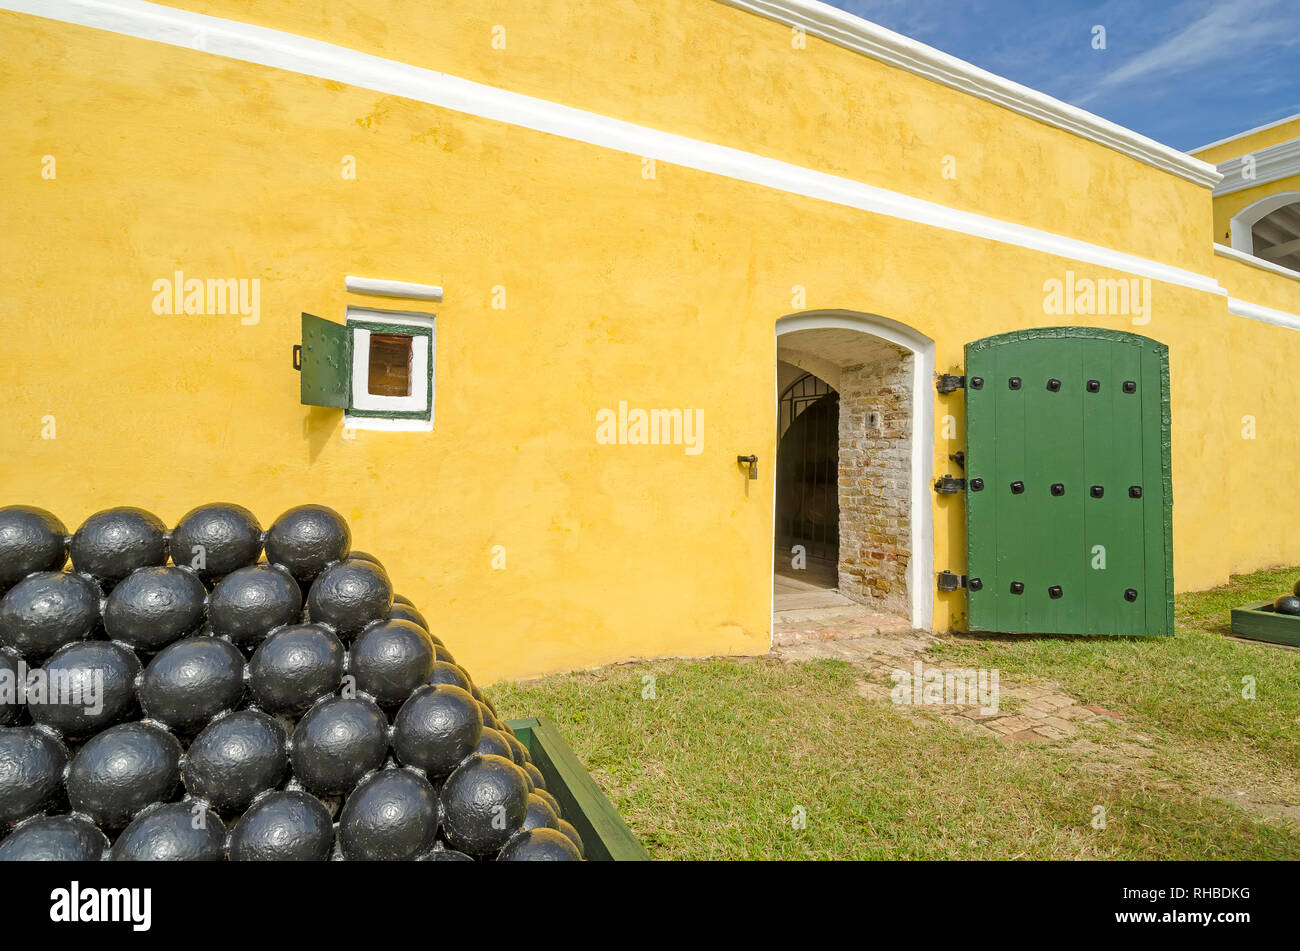 Fort Christiansvaern Cannon ball Stockpile at Christiansted  National Historic Site, Saint Croix, United States Virgin Islands Stock Photo